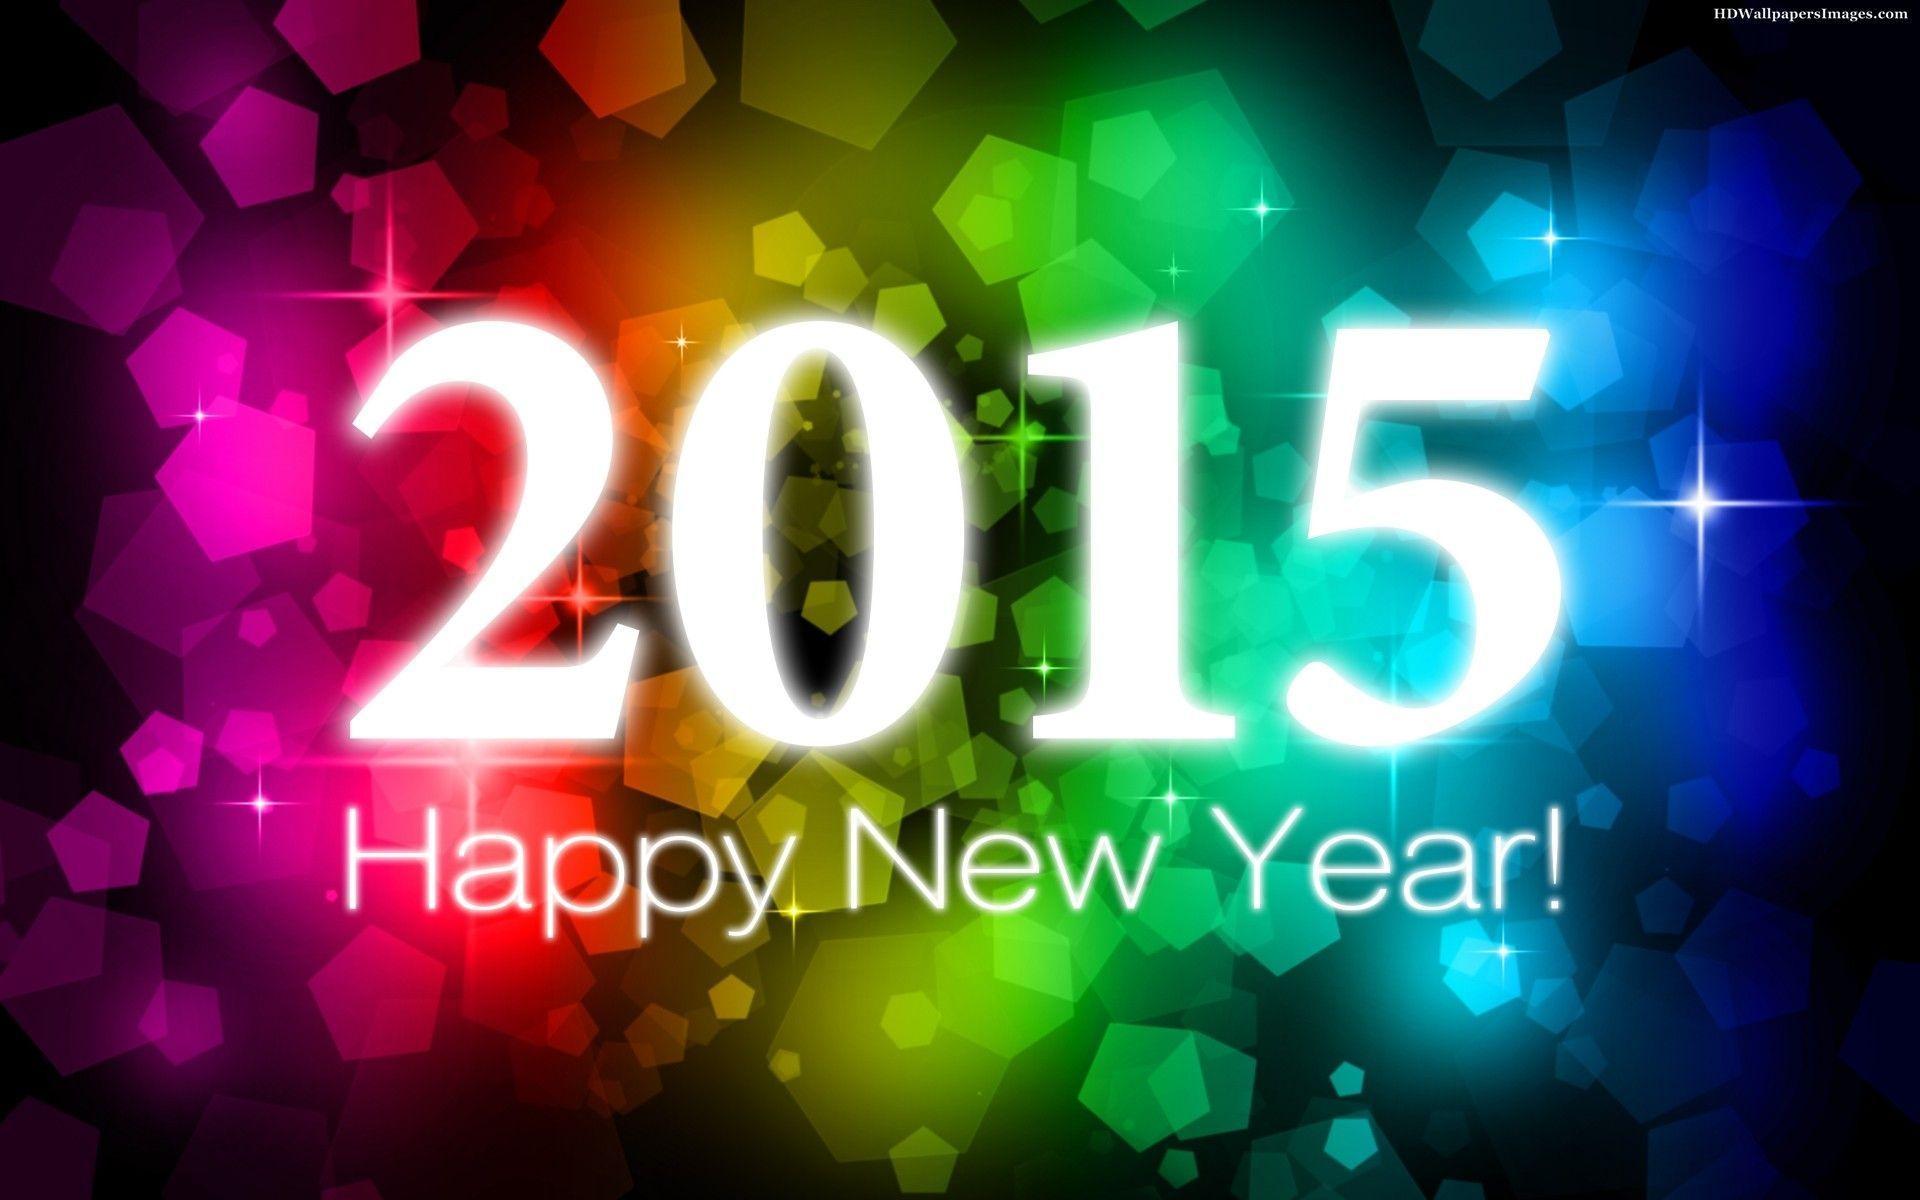 happy new year 2015 colorful pics wallpaper HD